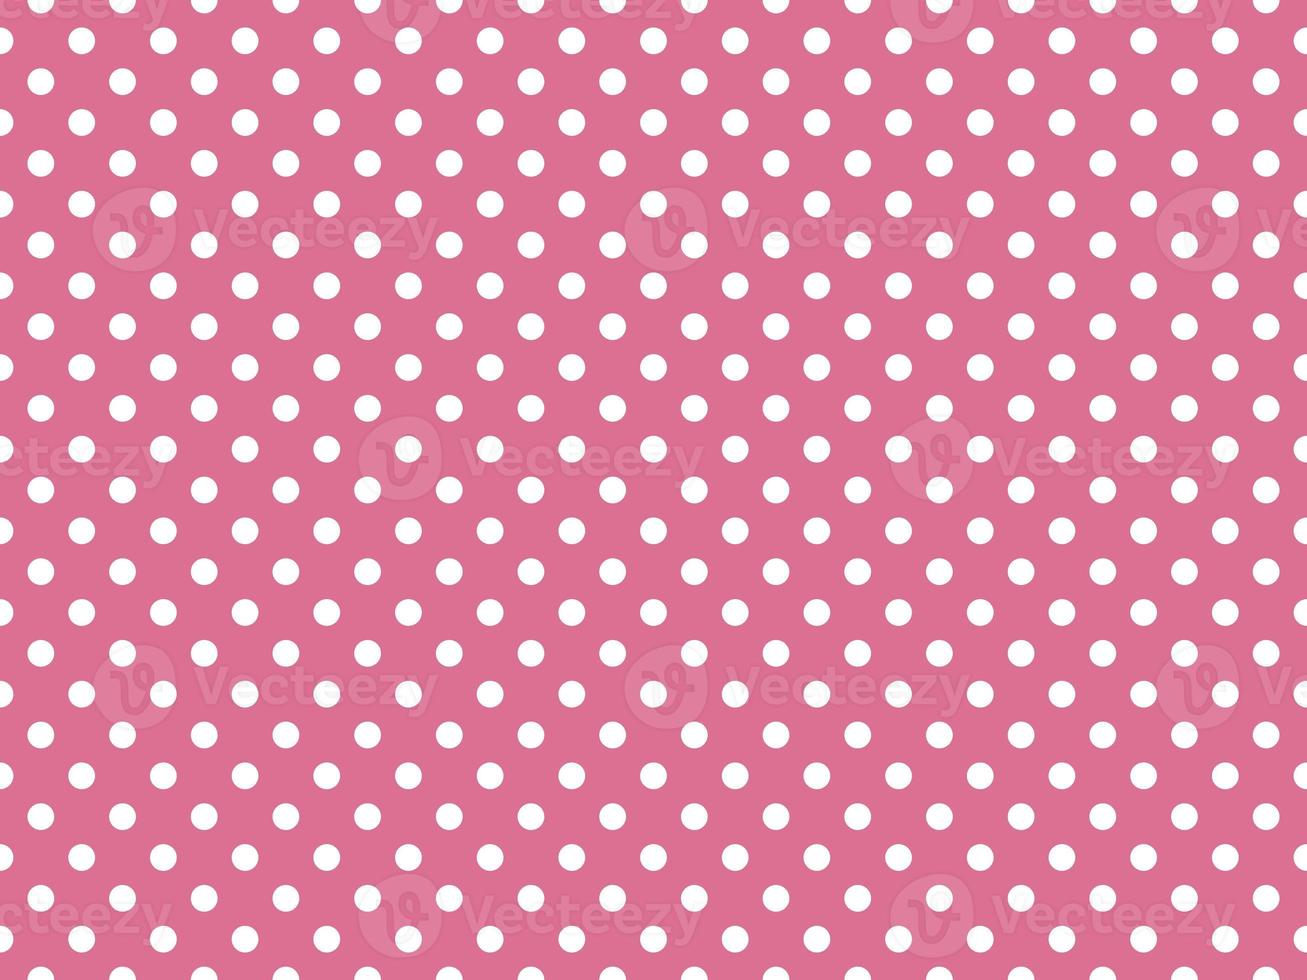 wit polka dots over- pale paars rood achtergrond foto